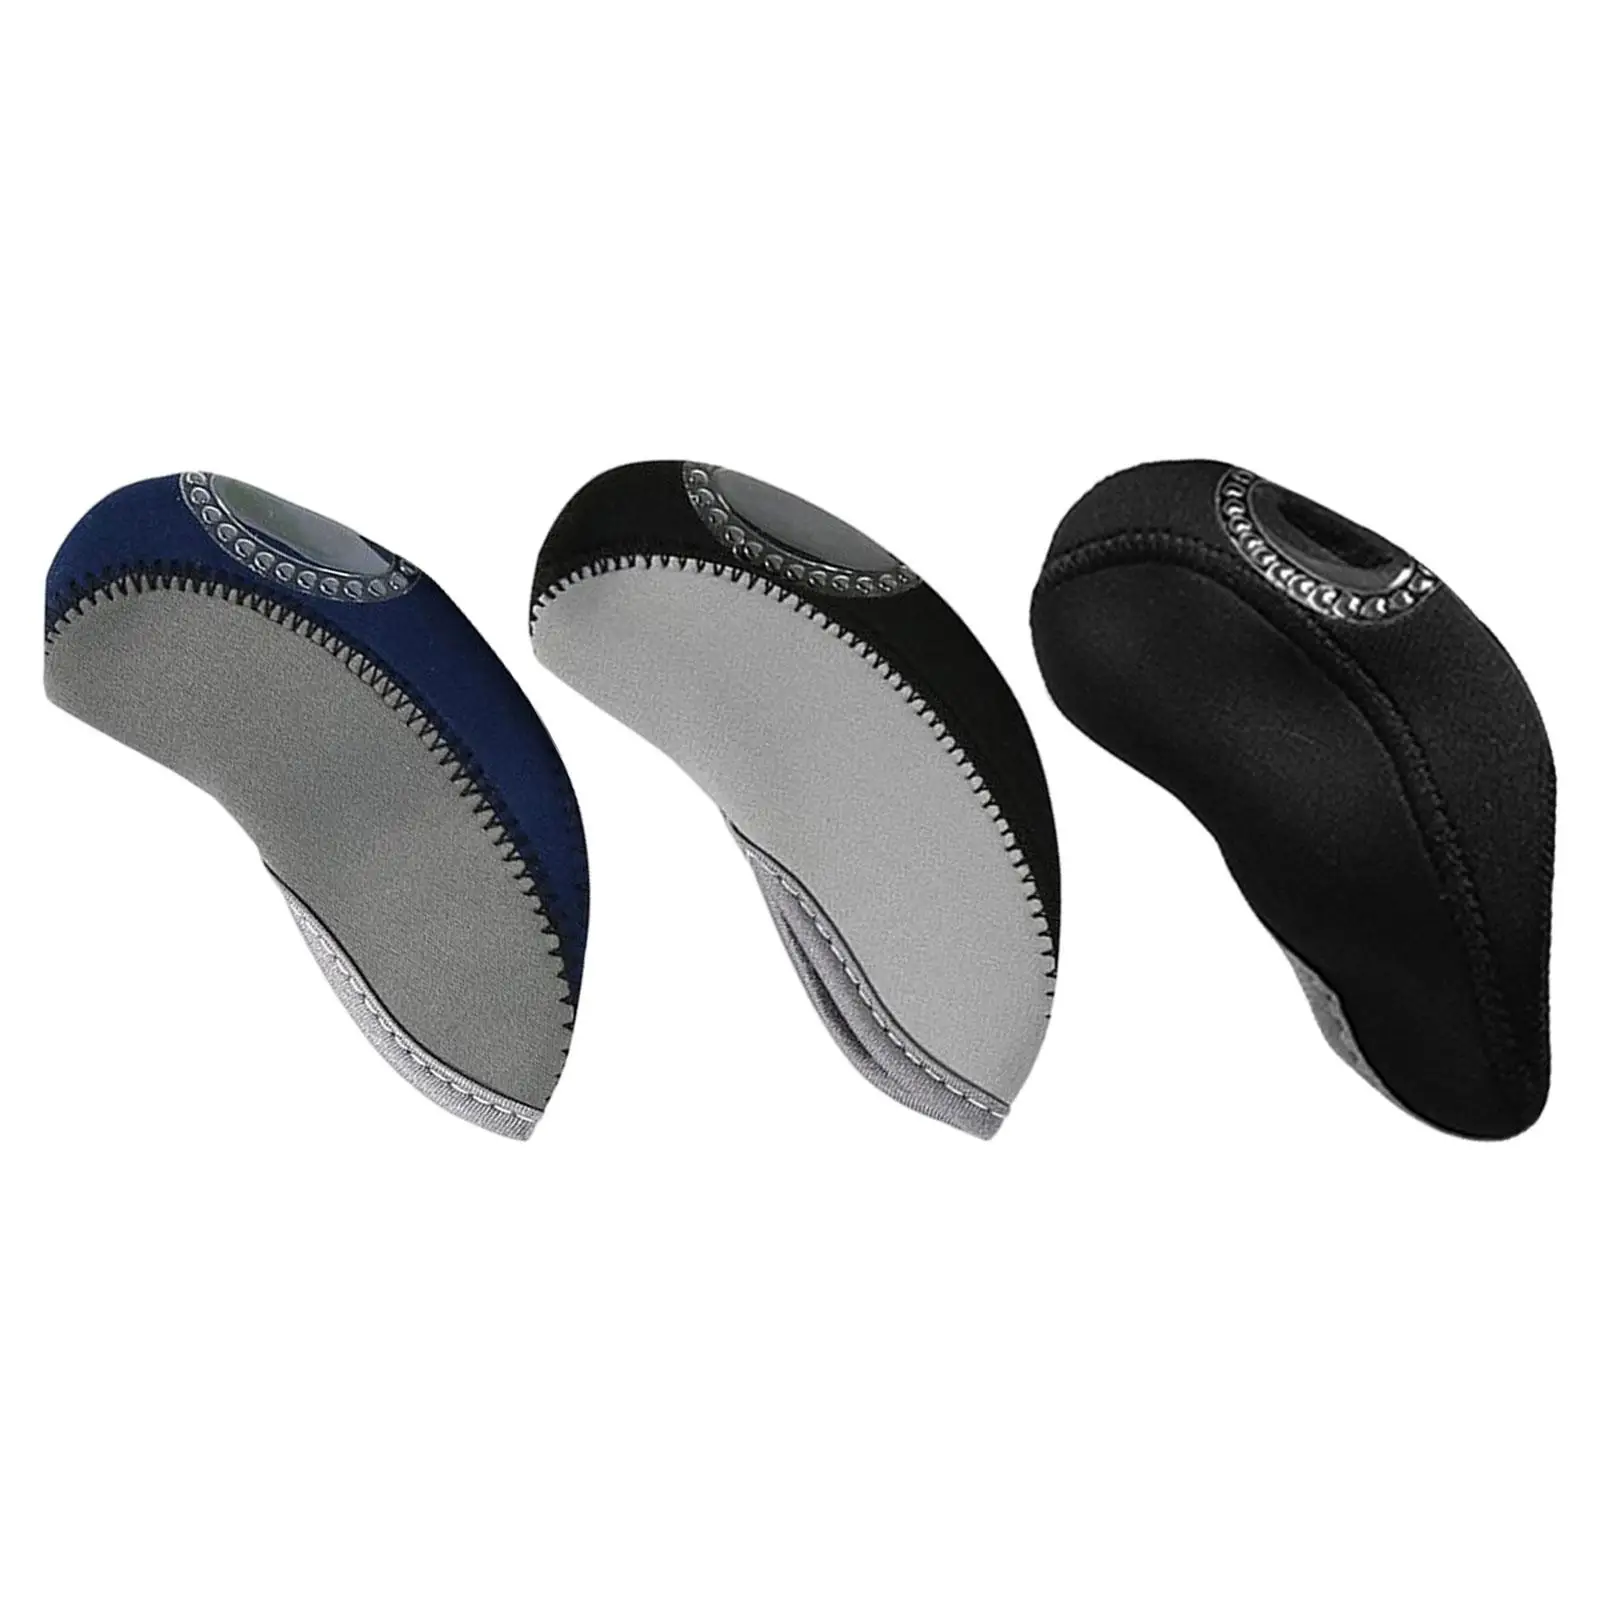 

Golf Iron Headcover Viewable Window Anti Scratch Golf Club Head Cover Protective Sleeve Golf Accessories